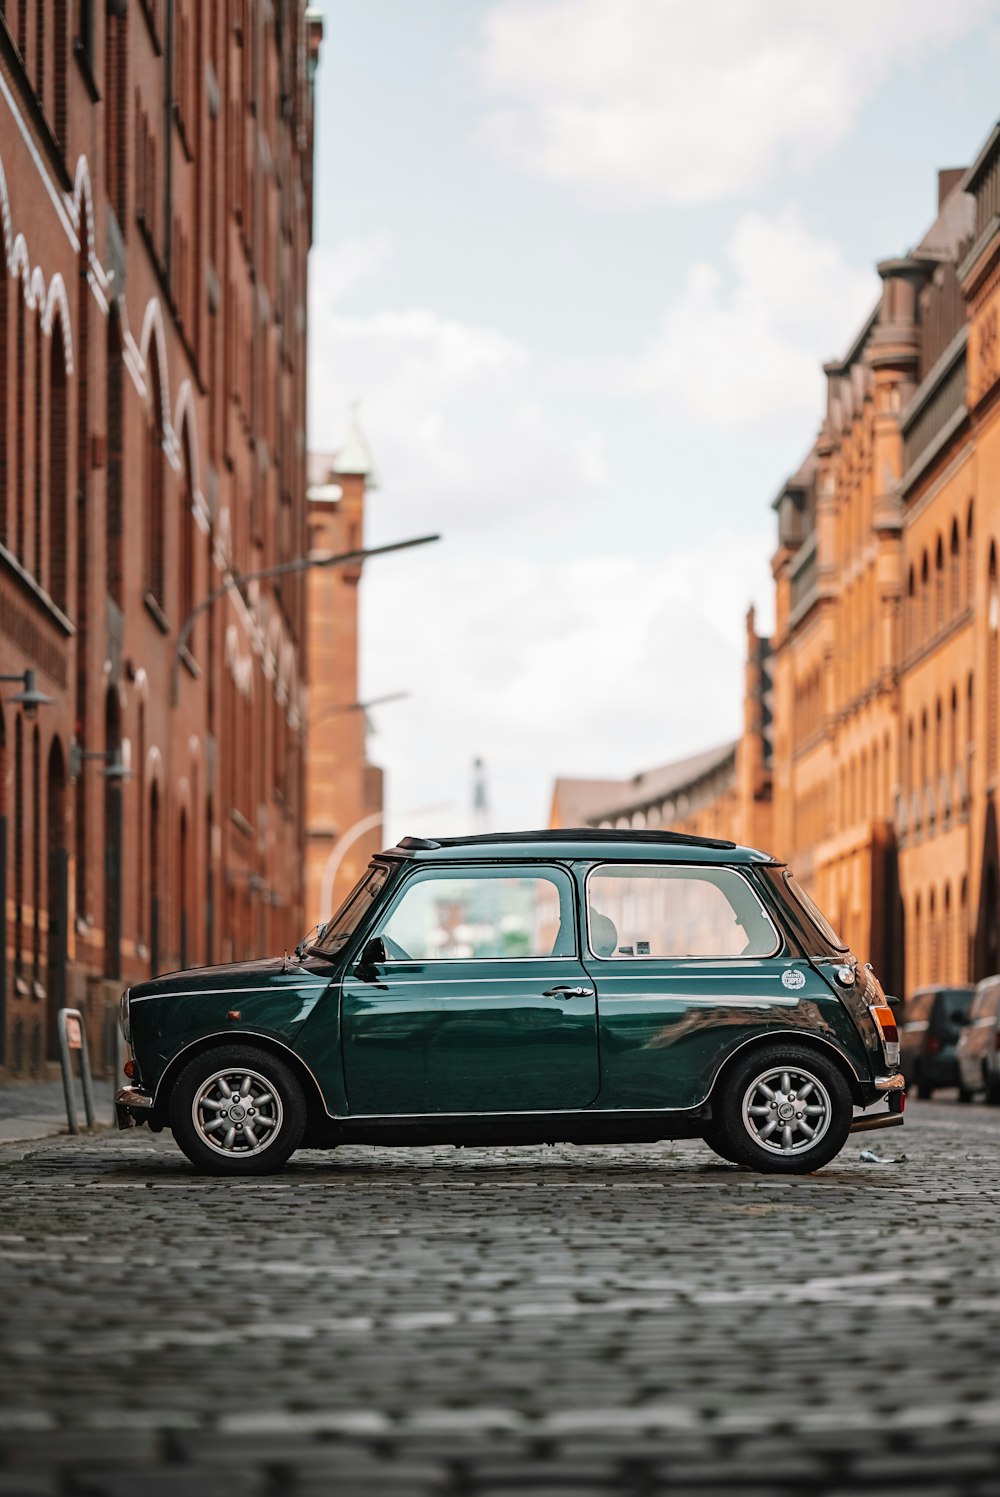 a small green car parked on a cobblestone street